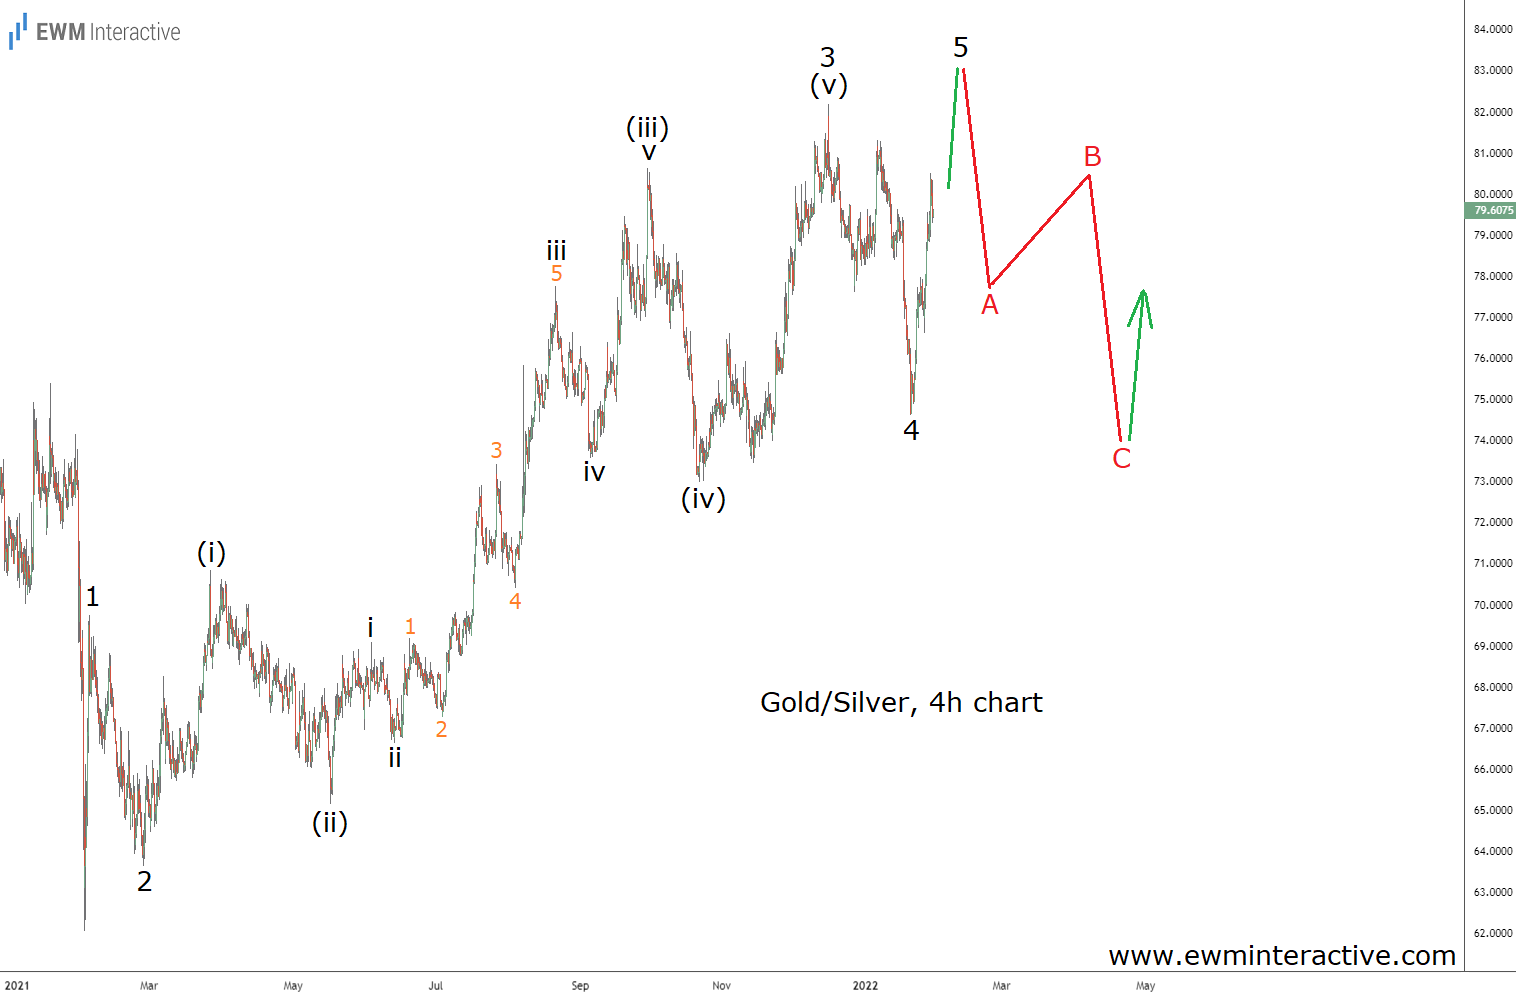 Gold/Silver Ratio, 4-Hr Chart